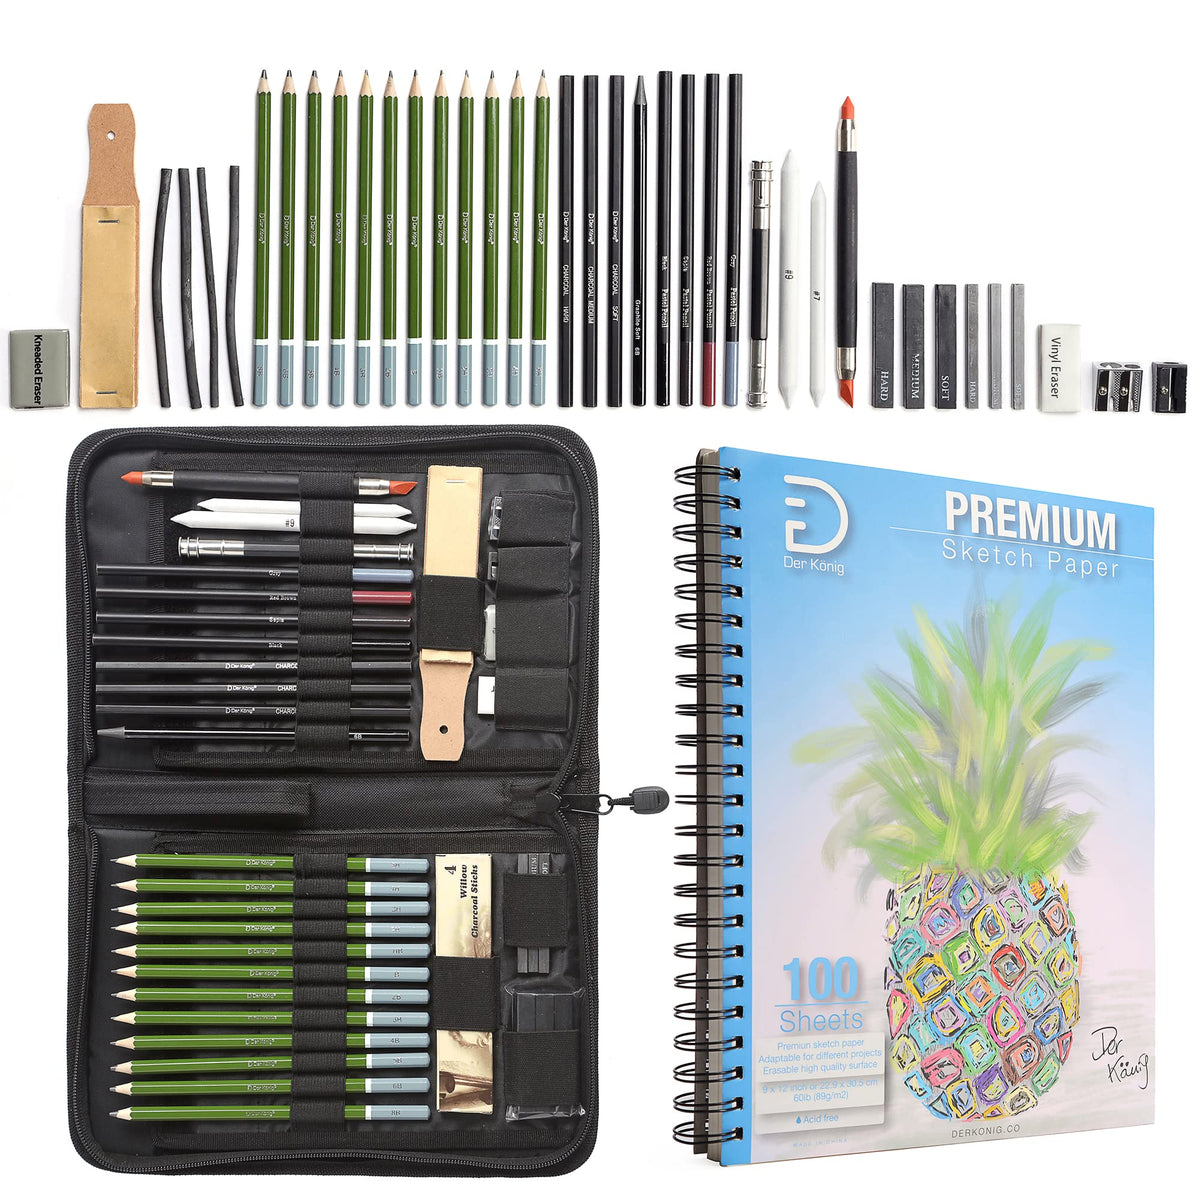 CwhaleCblu 77 Pack Drawing Set Art Supplies,Drawing Supplies with 3-Color  Sketch Book, Colored, Graphite, Charcoal, Watercolor&Metallic Pencil, Art